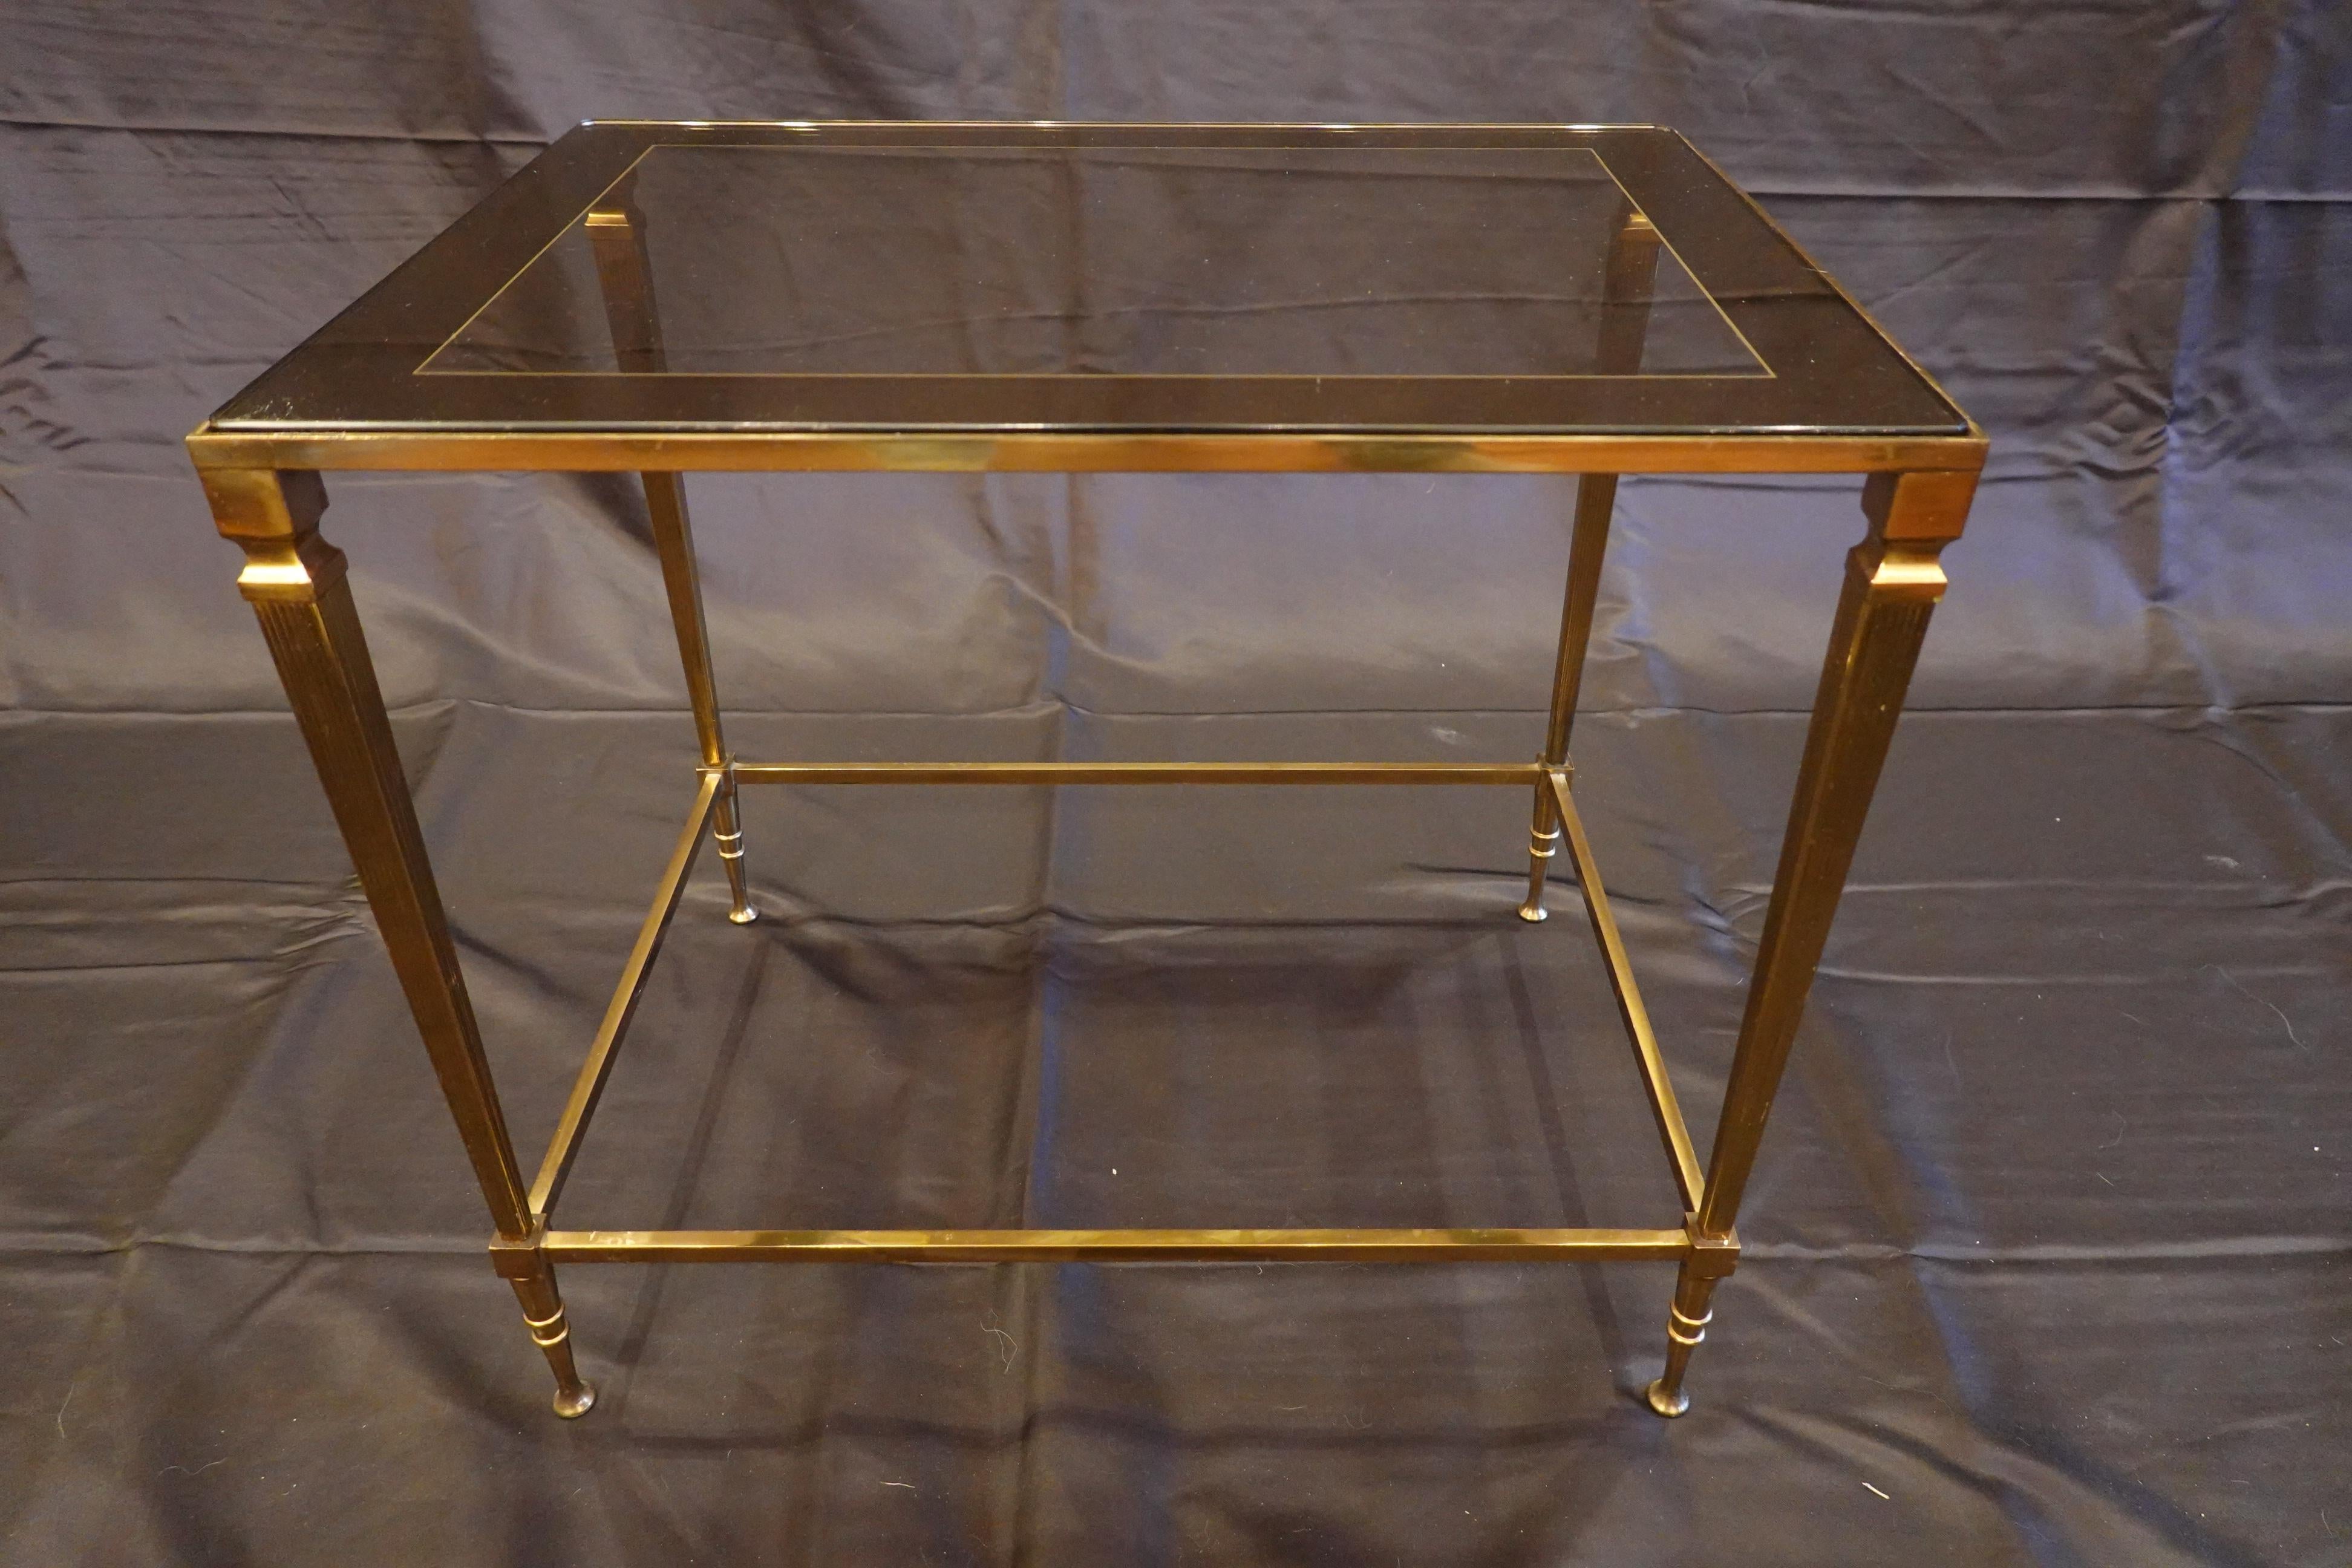 Pair of Italian Mid-Century Modern Side Tables with Glass and Mirrored Tops In Good Condition For Sale In Pembroke, MA